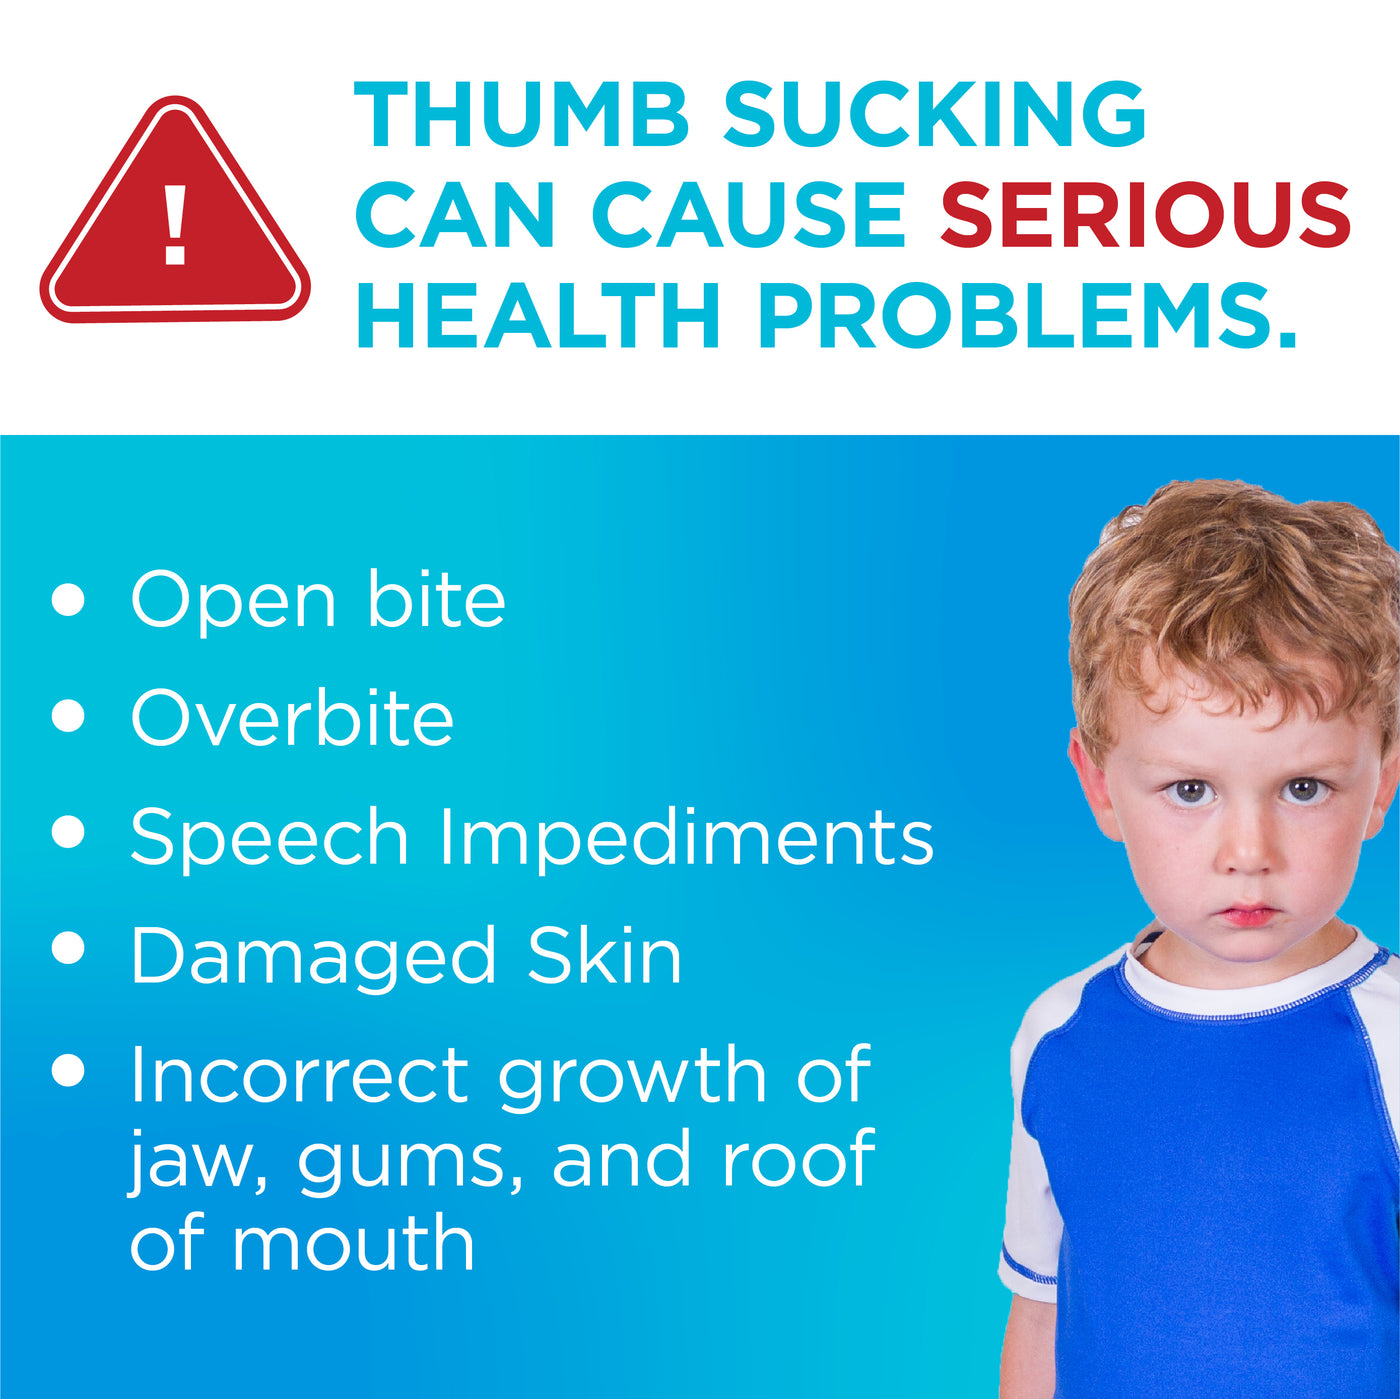 Thumb sucking can cause serious health problems, stop them at a young age with the BraceAbility thumb sucking guard.